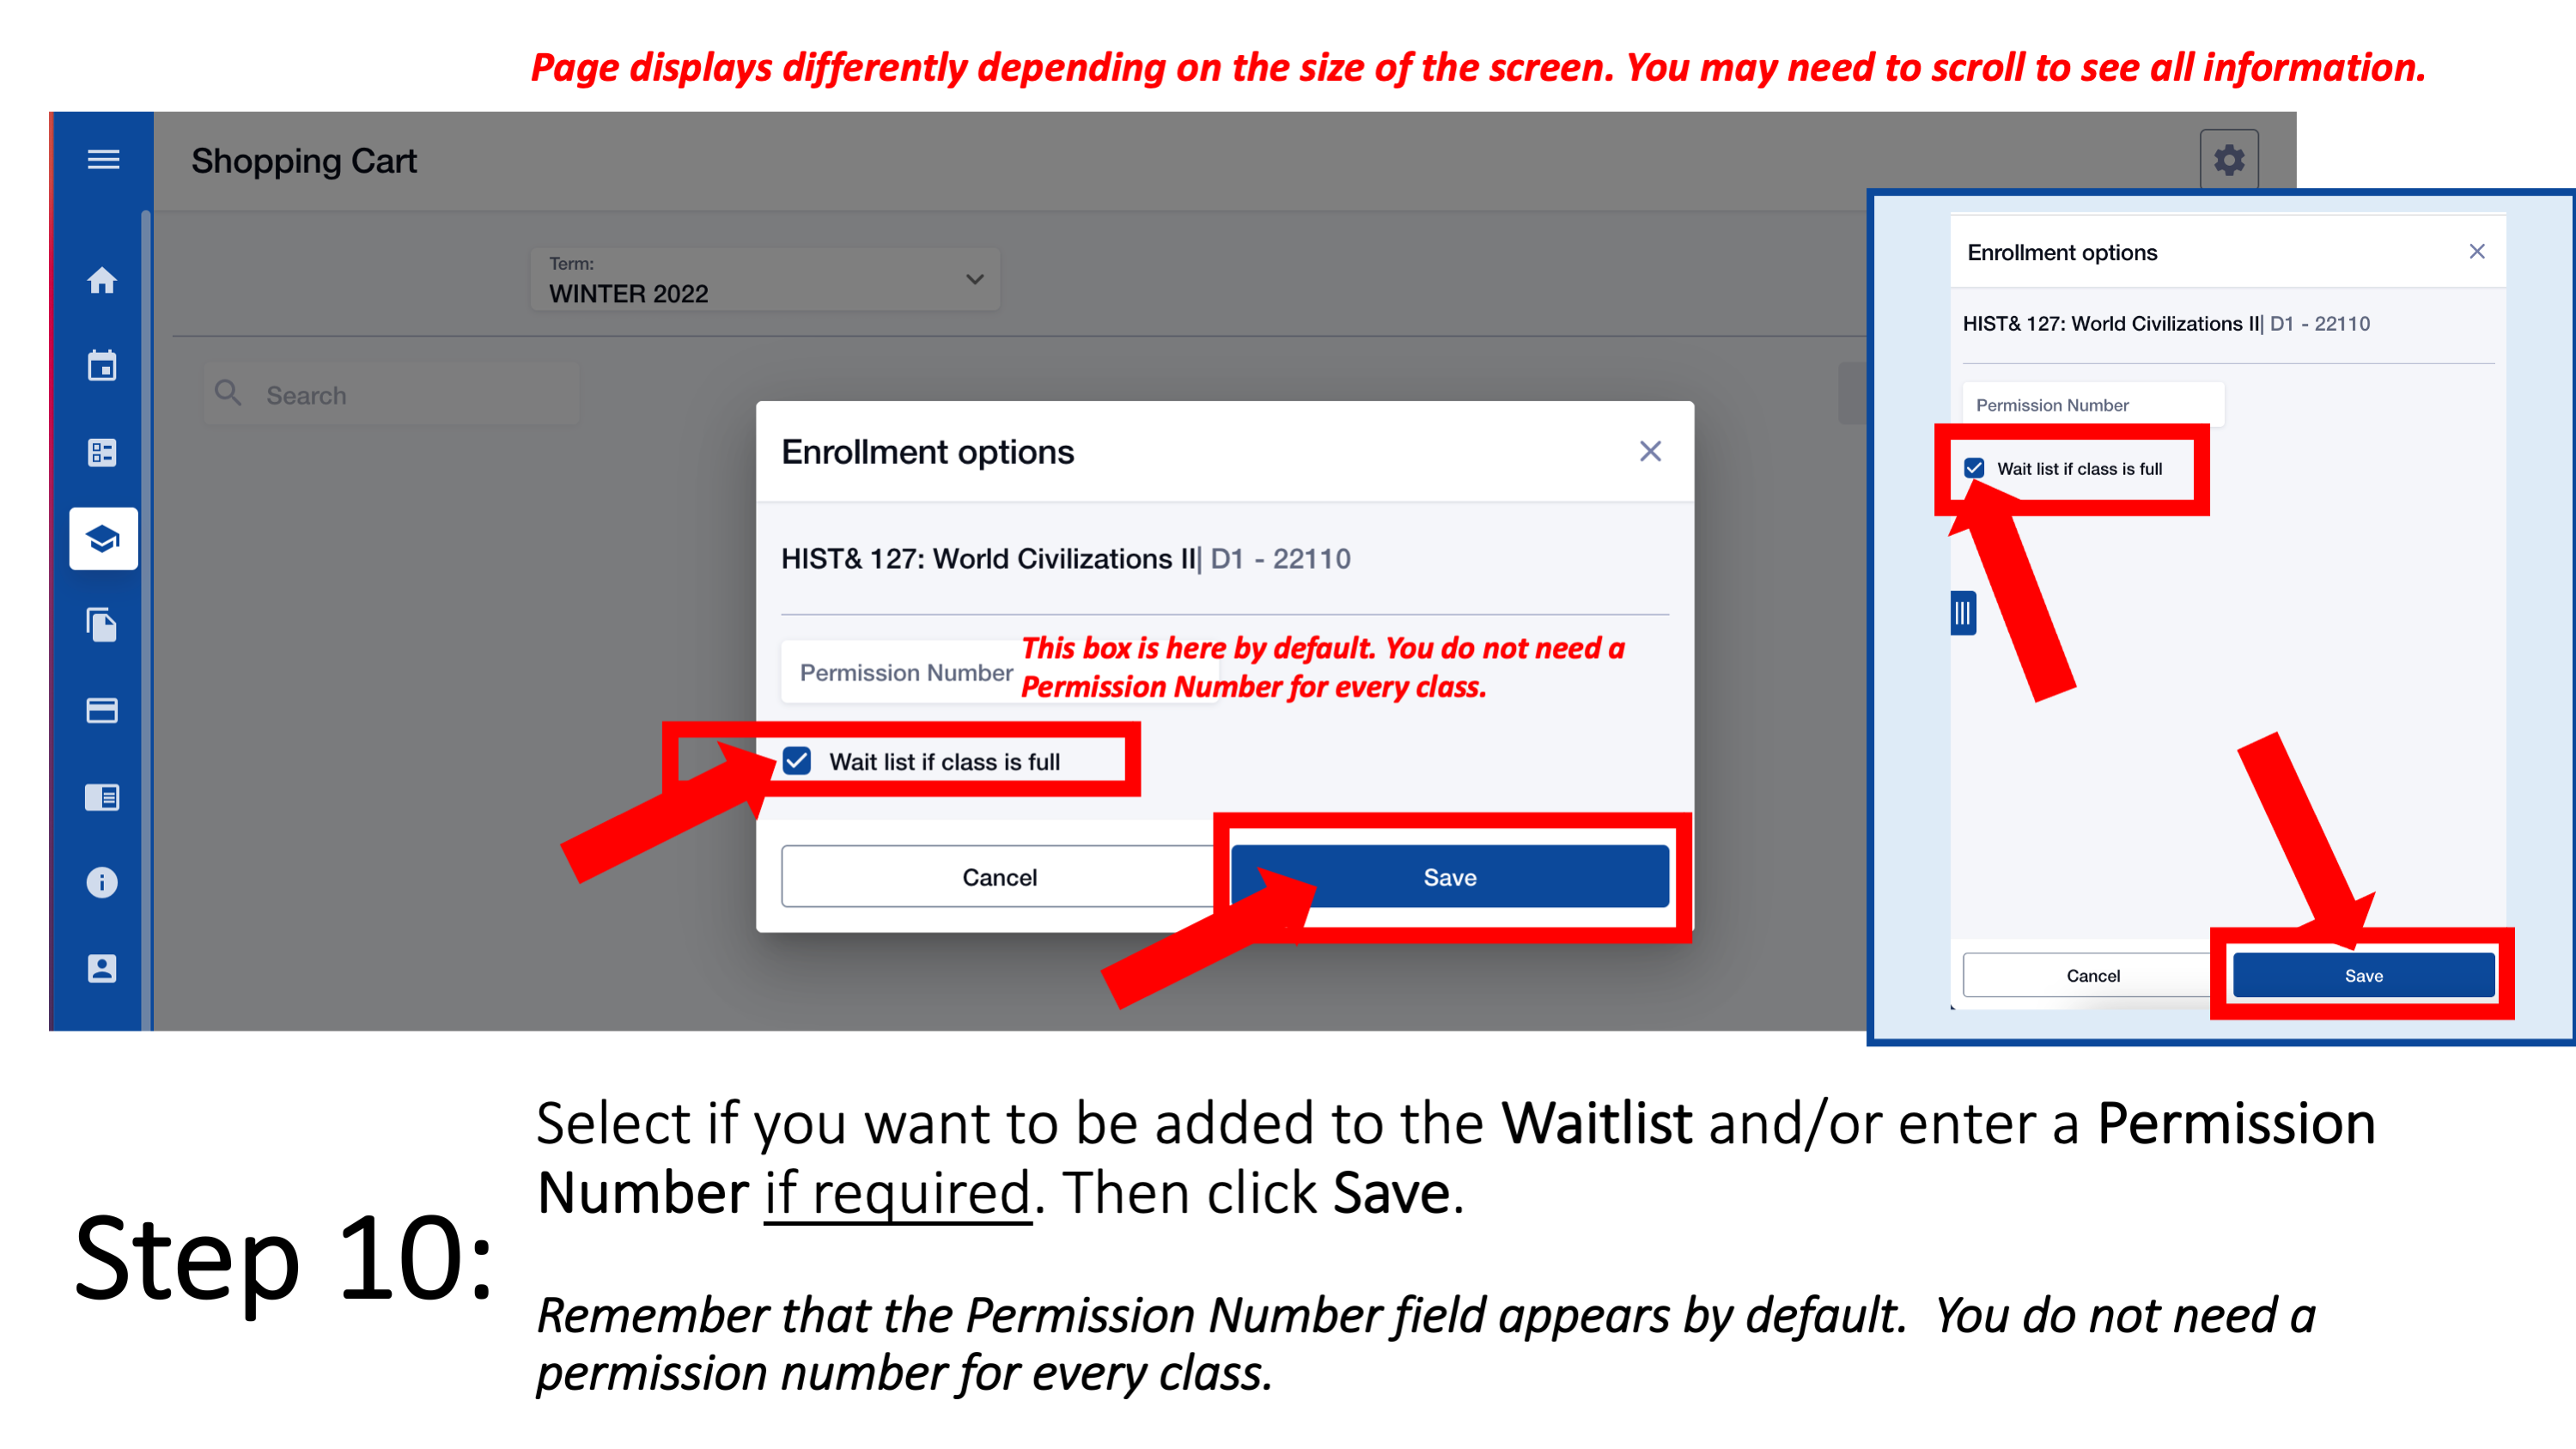 Step 10: Select if you want to be added to the Waitlist and/or enter a Permission Number if required. Then click Save. Remember that the Permission Number field appears by default. You do not need a permission number for every class.